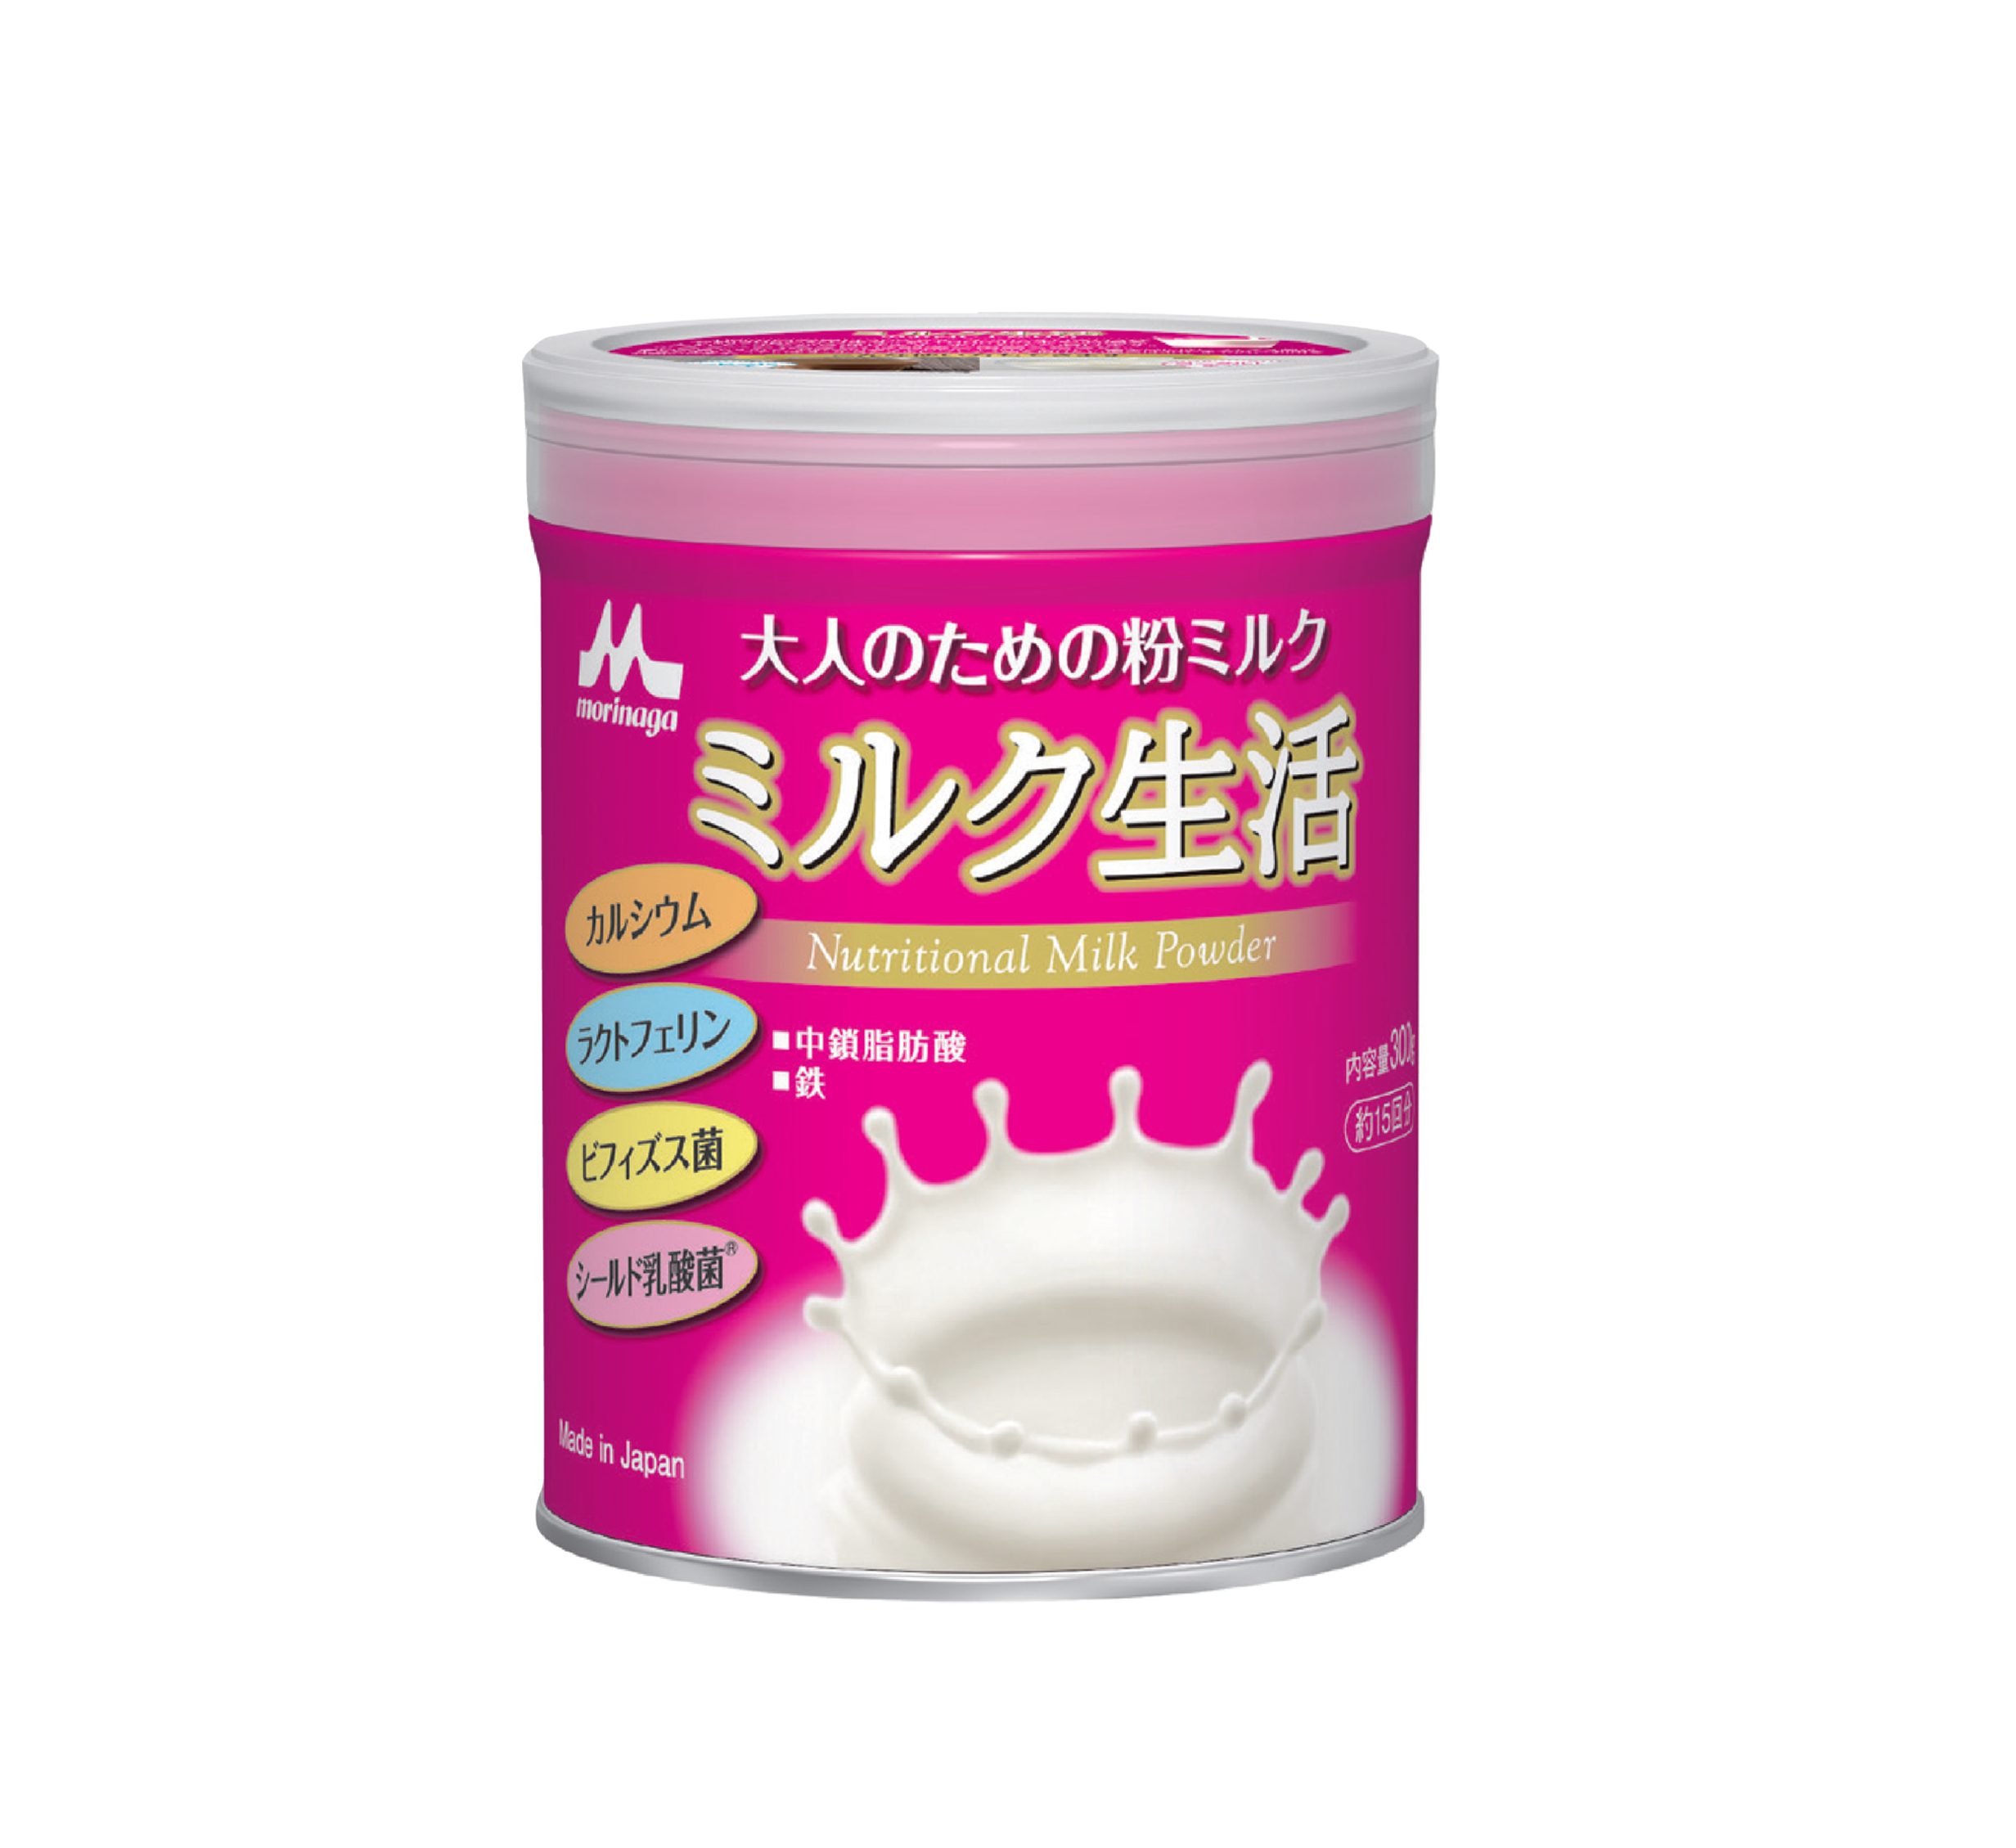 MORINAGA NUTRITIONAL MILK POWDER – Imported from Japan – 300g Can